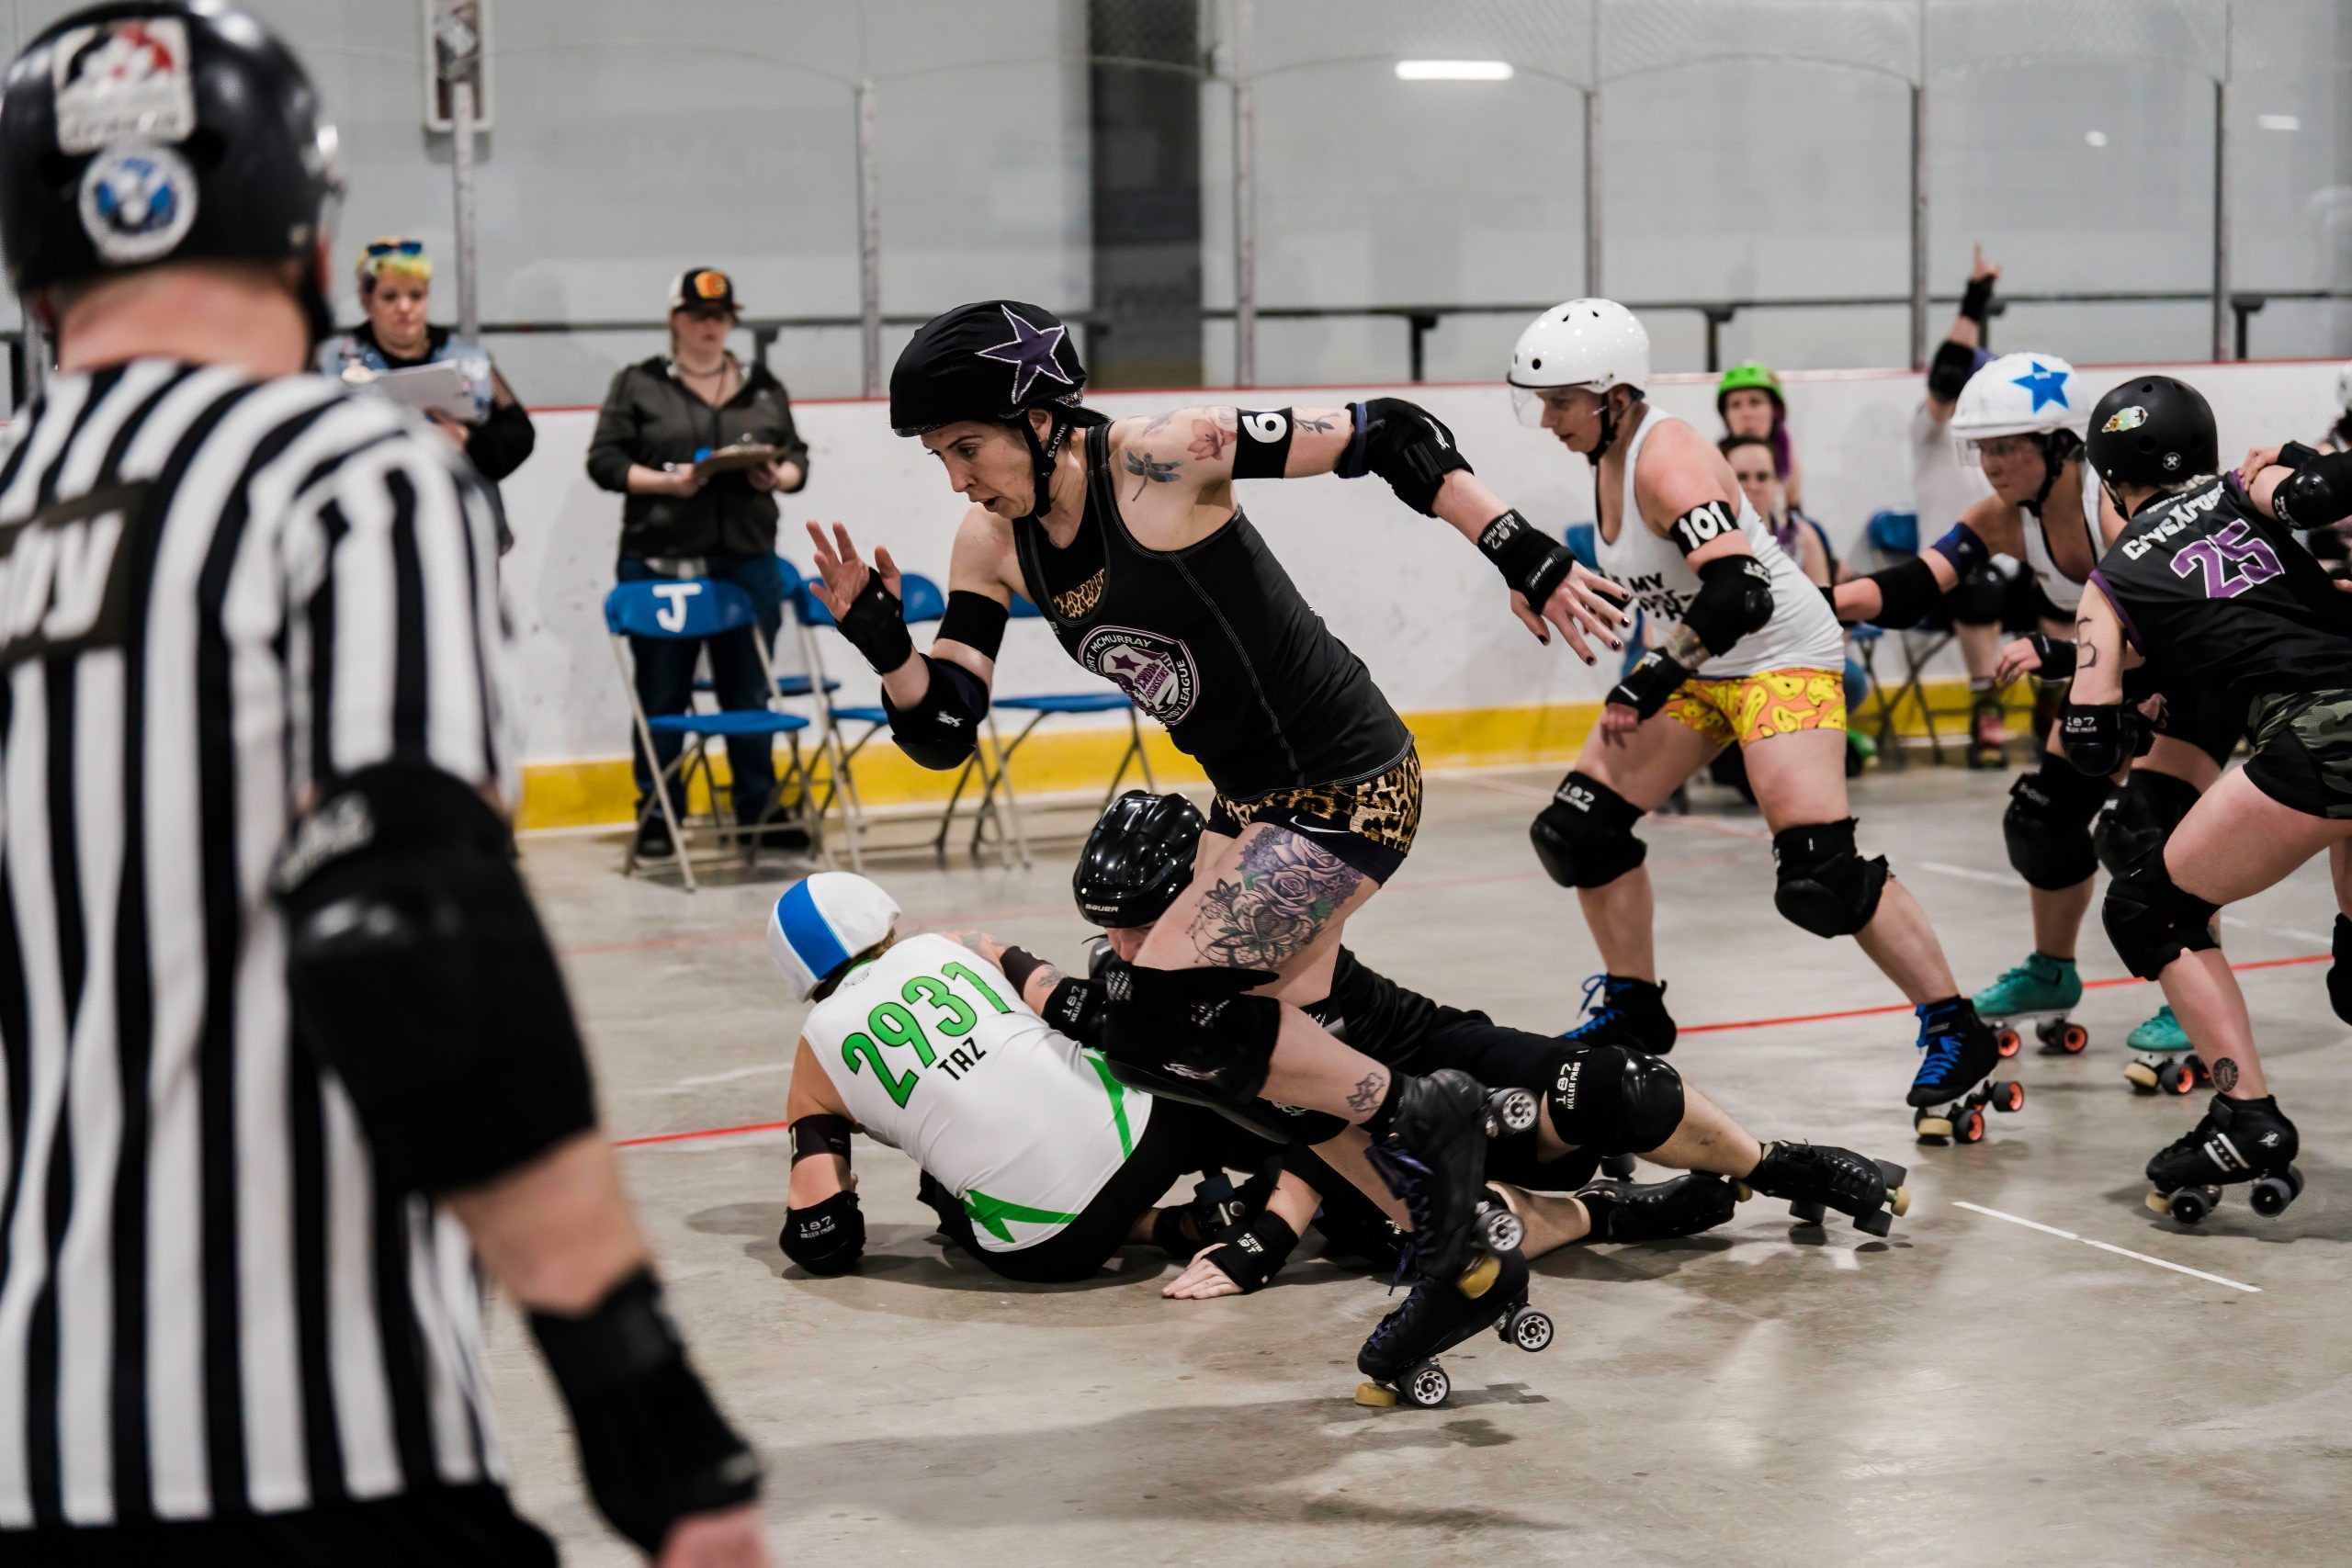 Team Alberta Roller Derby includes four athletes from Fort McMurray